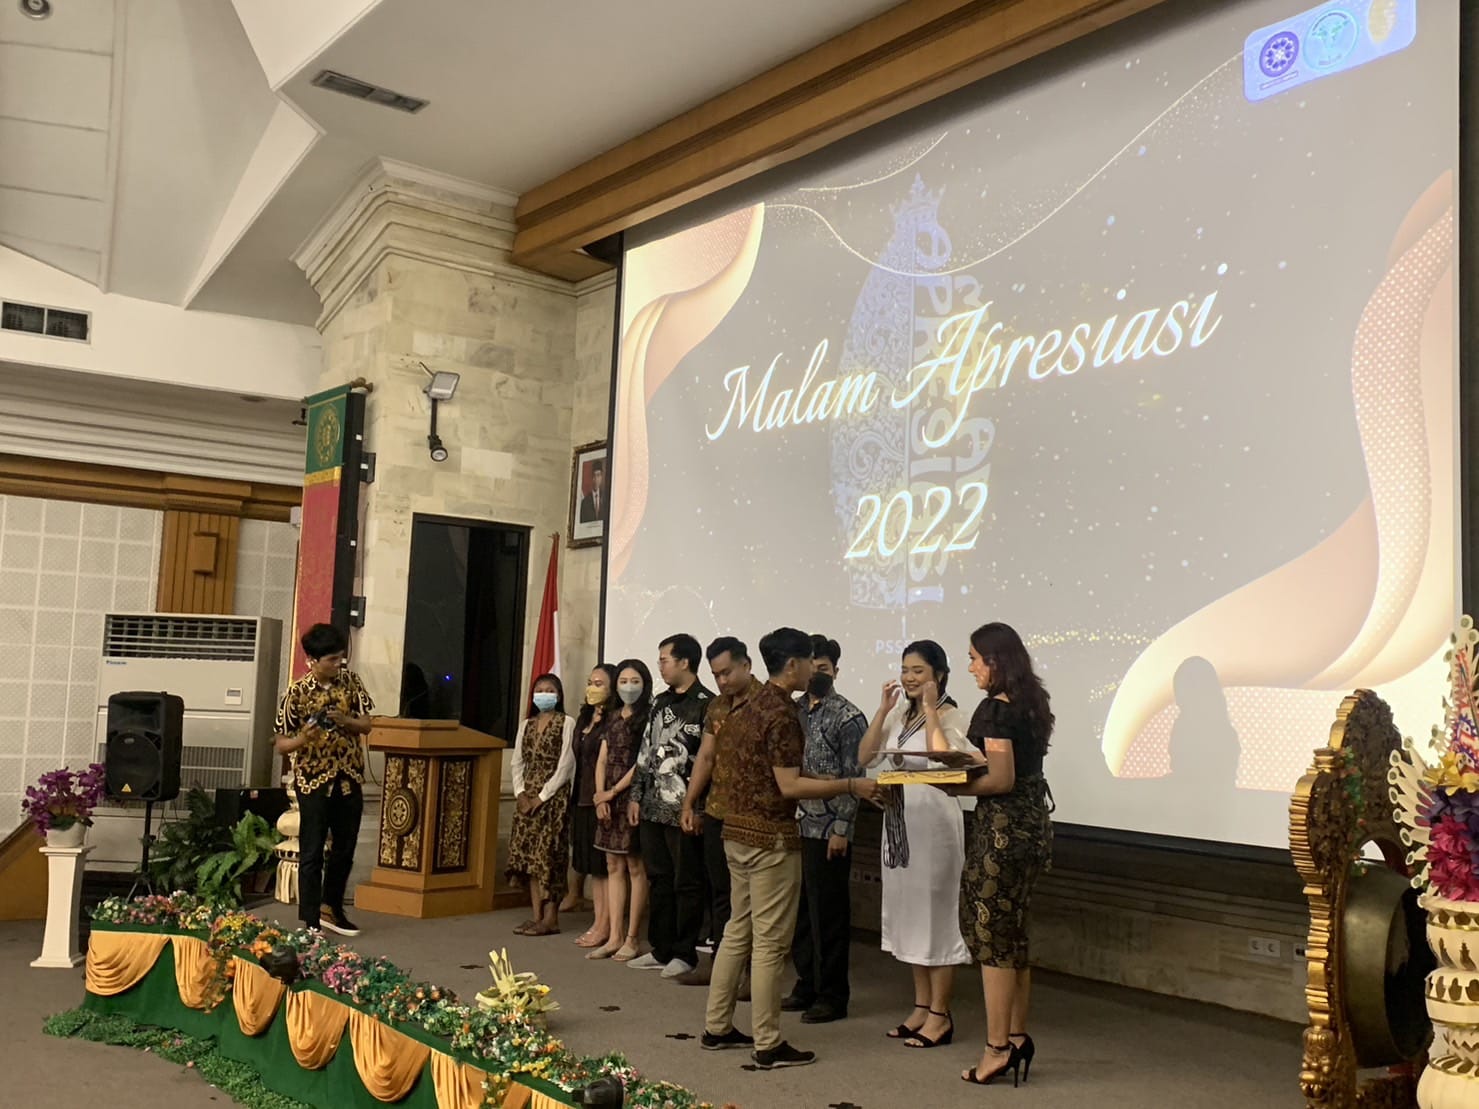 Appreciation Night of the 2022 Physiotherapy Student Association of the Faculty of Medicine, Udayana University